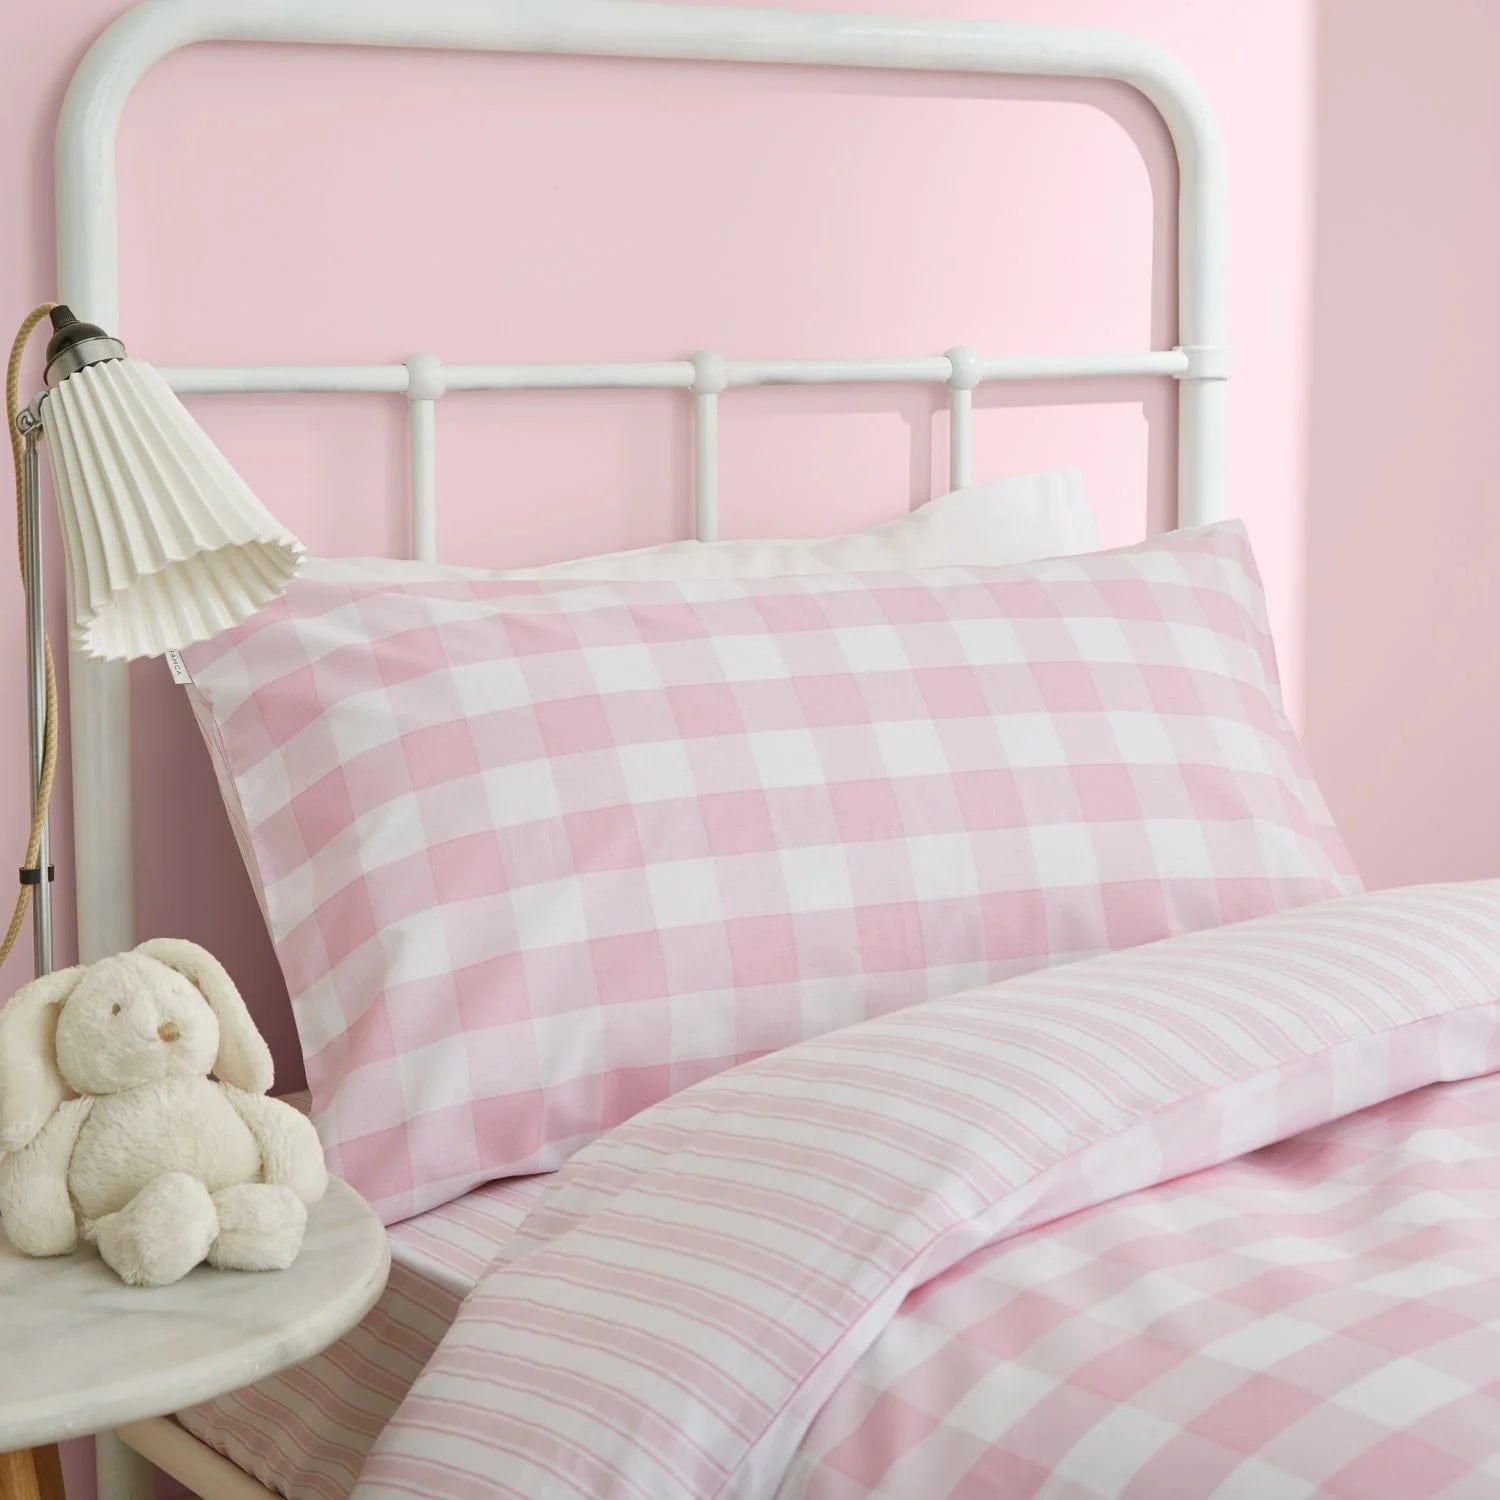 Little Bianca Fine Linens Bedroom Check And Stripe Fitted Sheet 25cm Depth Pink